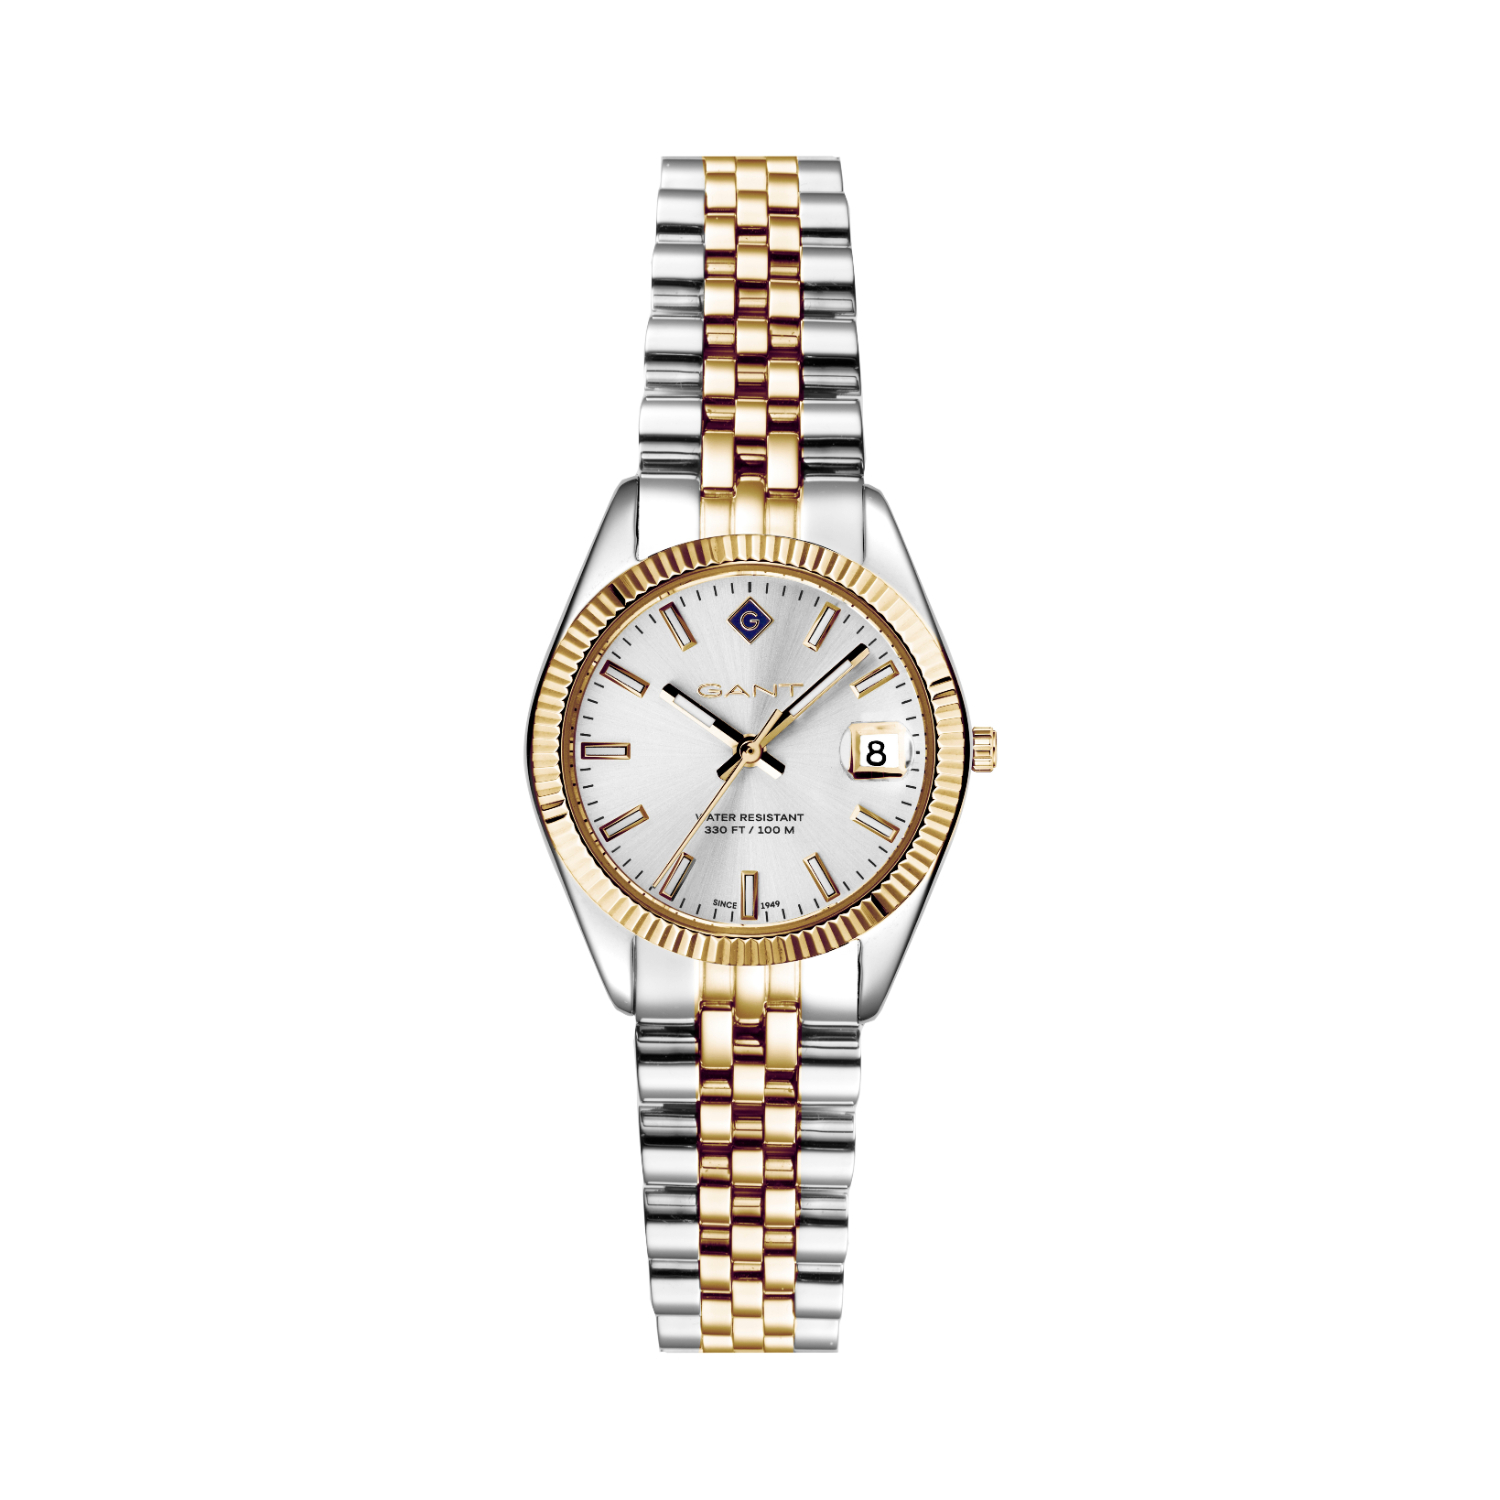 GANT womens bicolour stainless steel watch with white dial and bracelet.